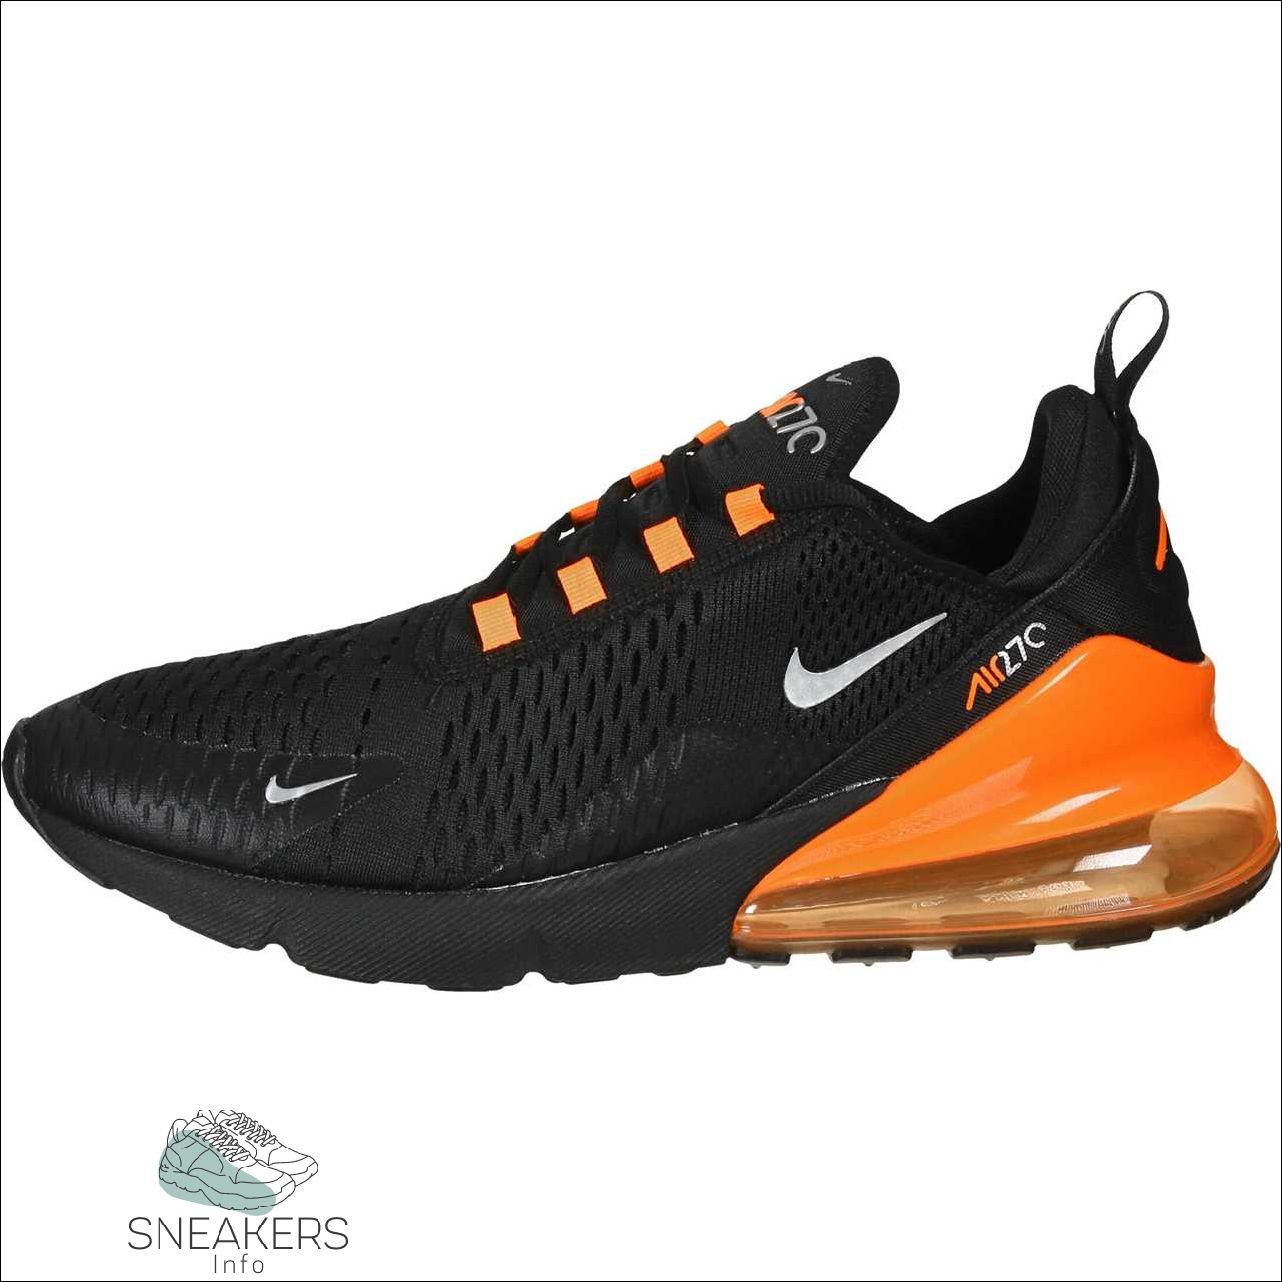 Are Air Max 270 Basketball Shoes Worth the Hype Find Out Here